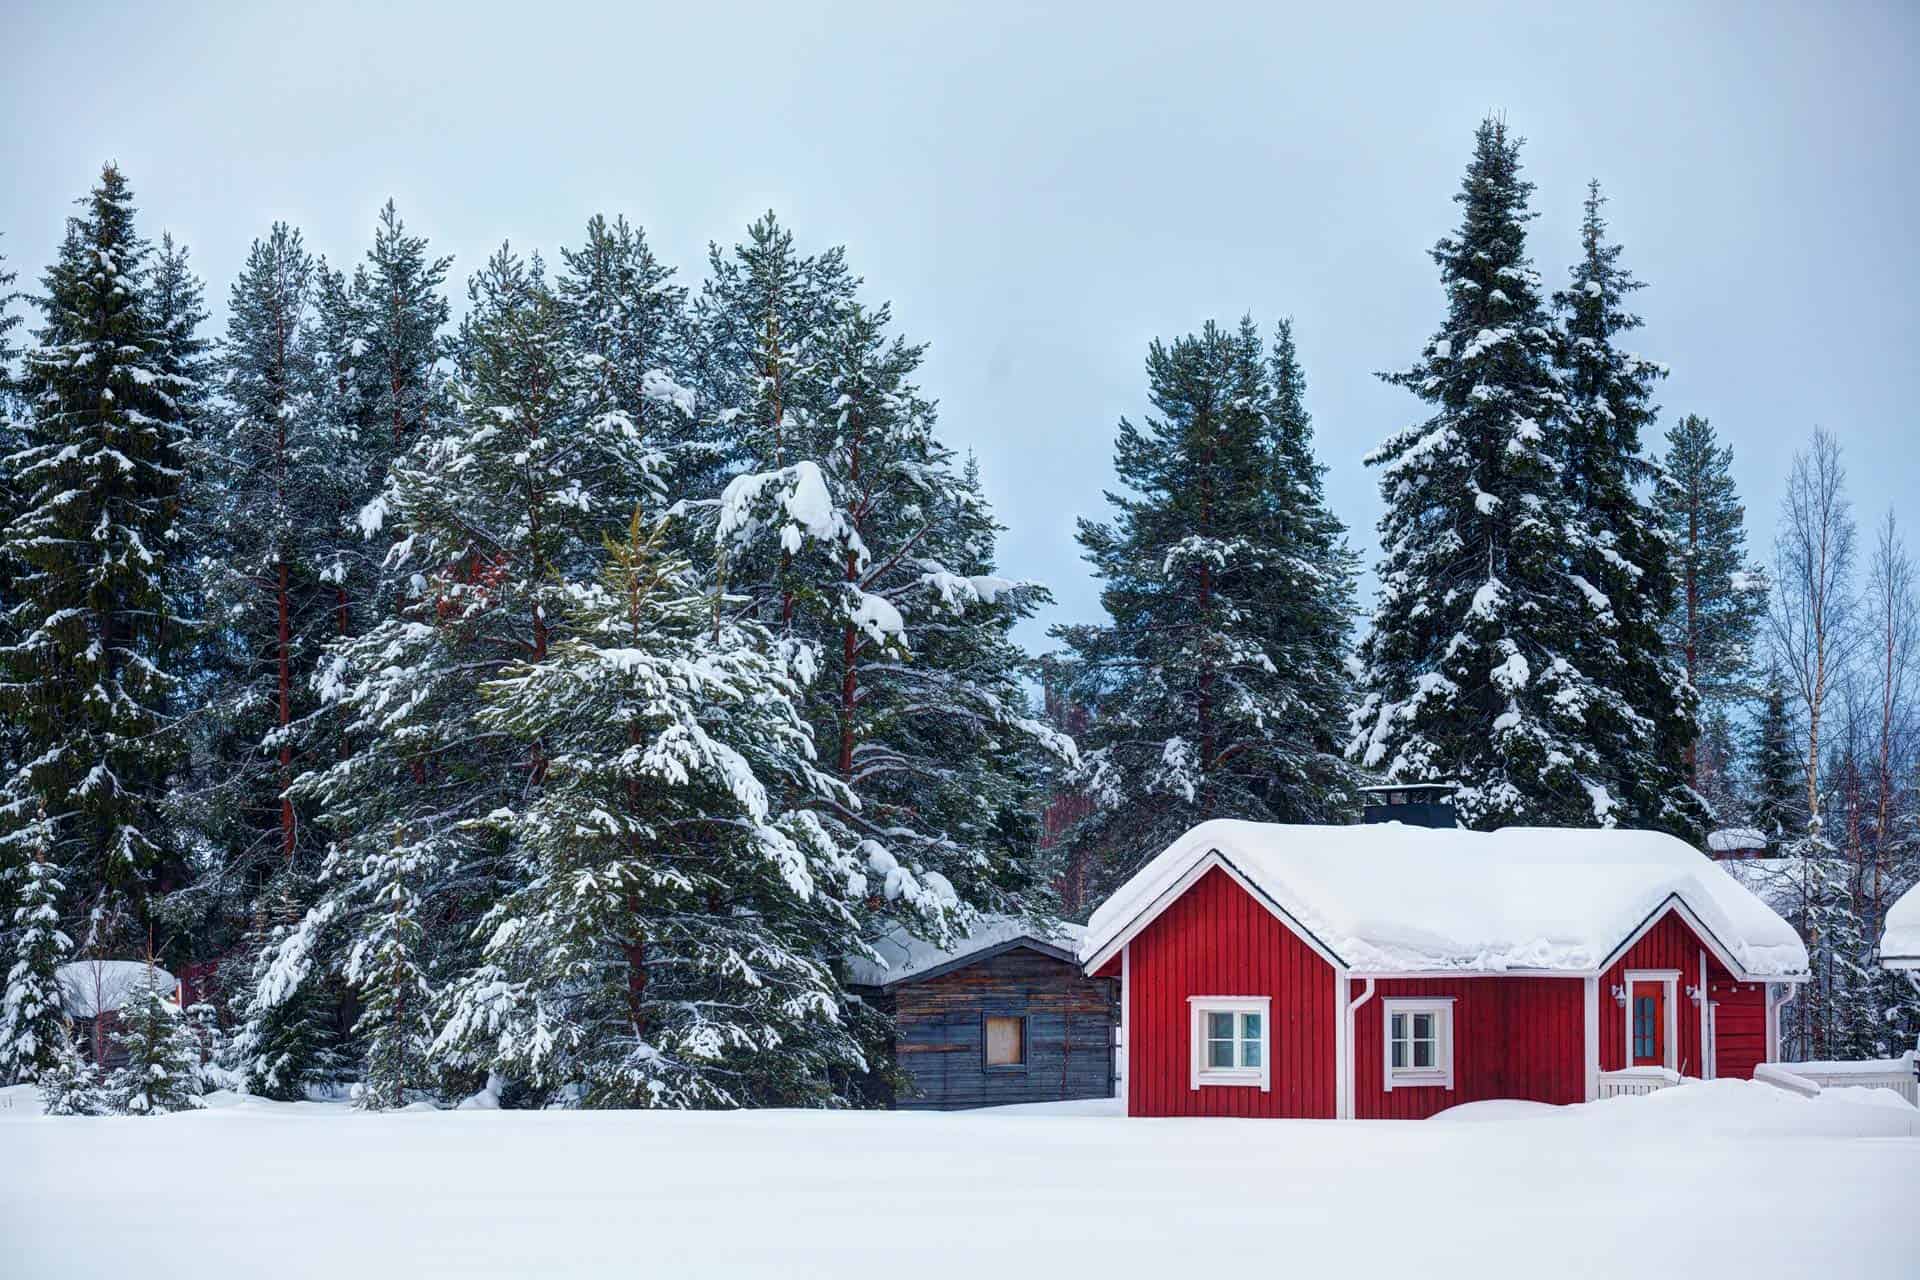 Red cottage in snowy forest landscape, an idyllic place to move to live a simple life.